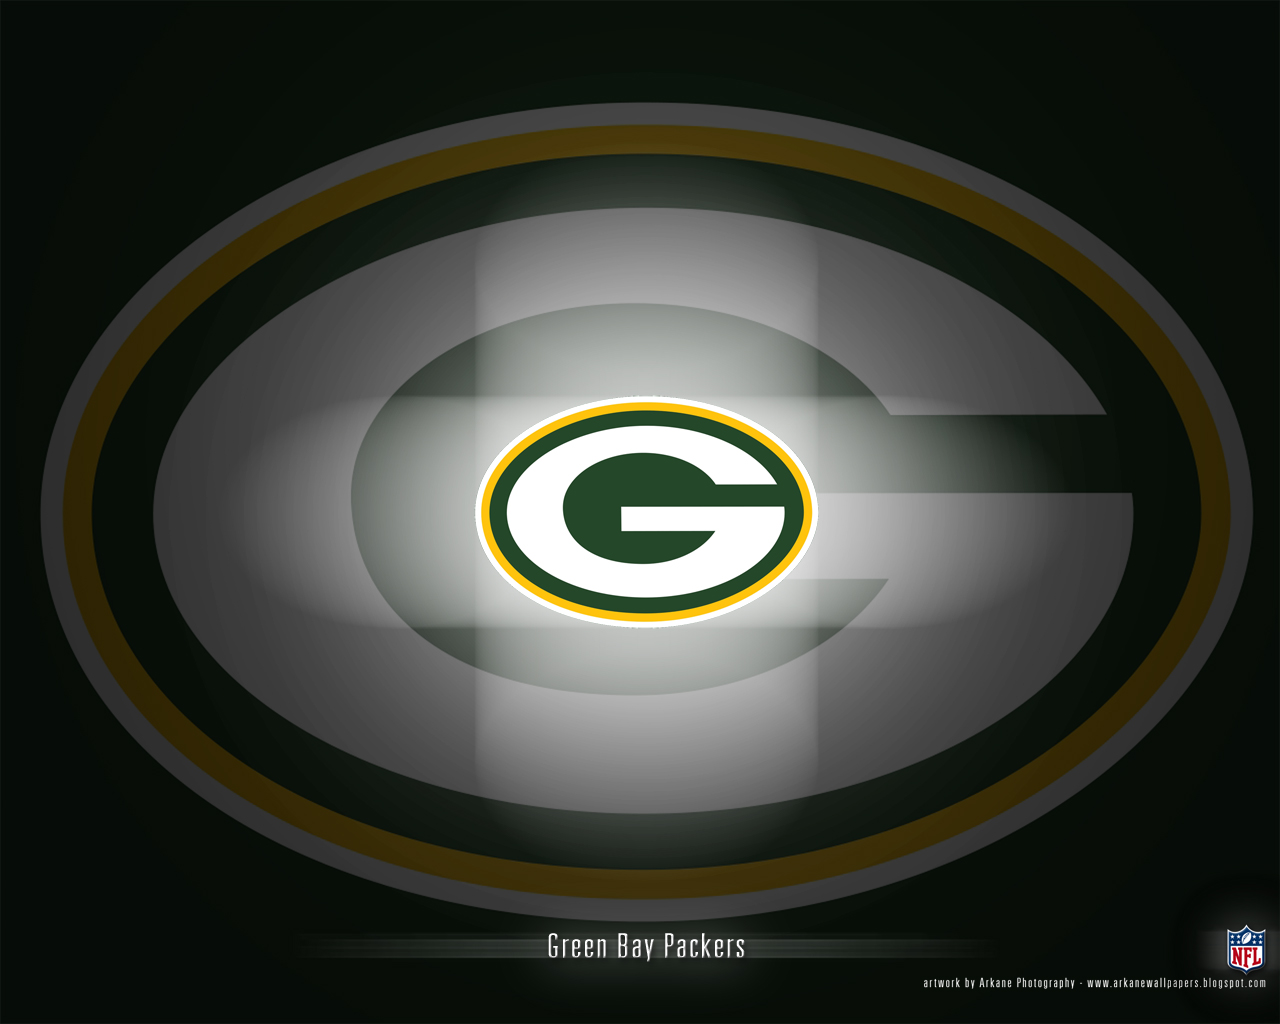 Arkane Nfl Wallpaper Green Bay Packers Vol Chainimage